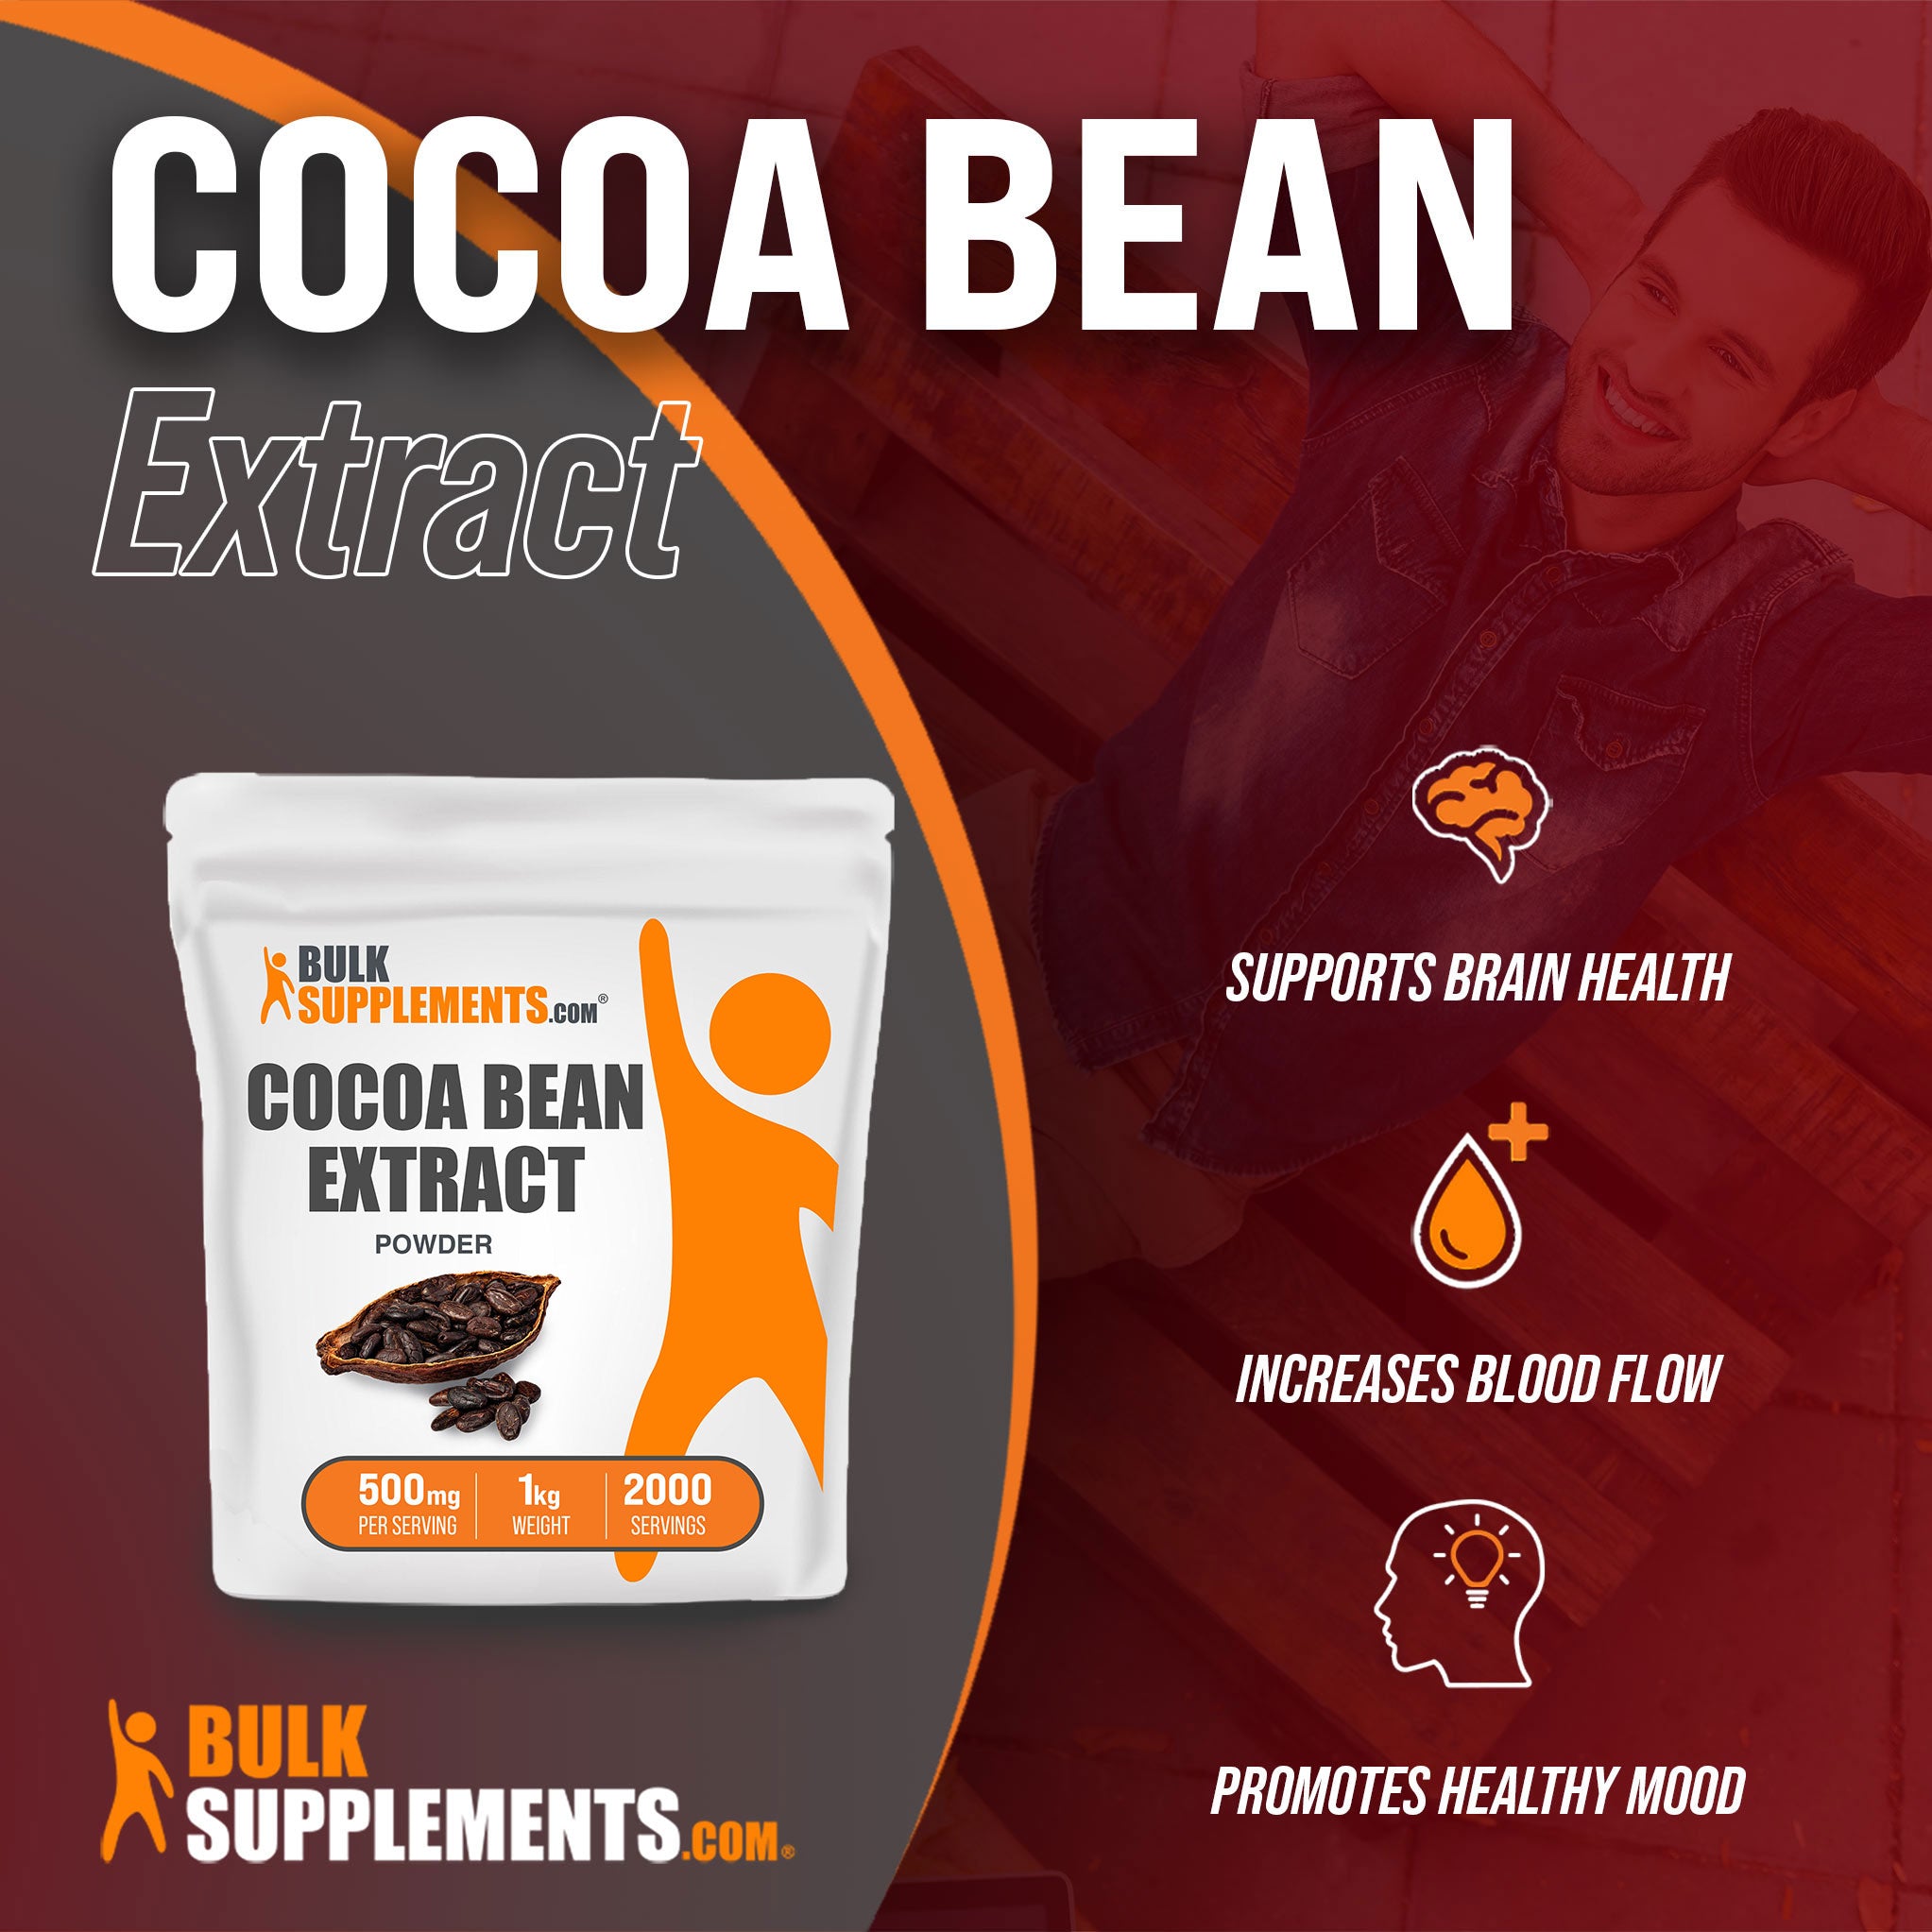 1kg Cocoa Bean circulation supplements; supports brain health, increases blood flow, promotes healthy mood